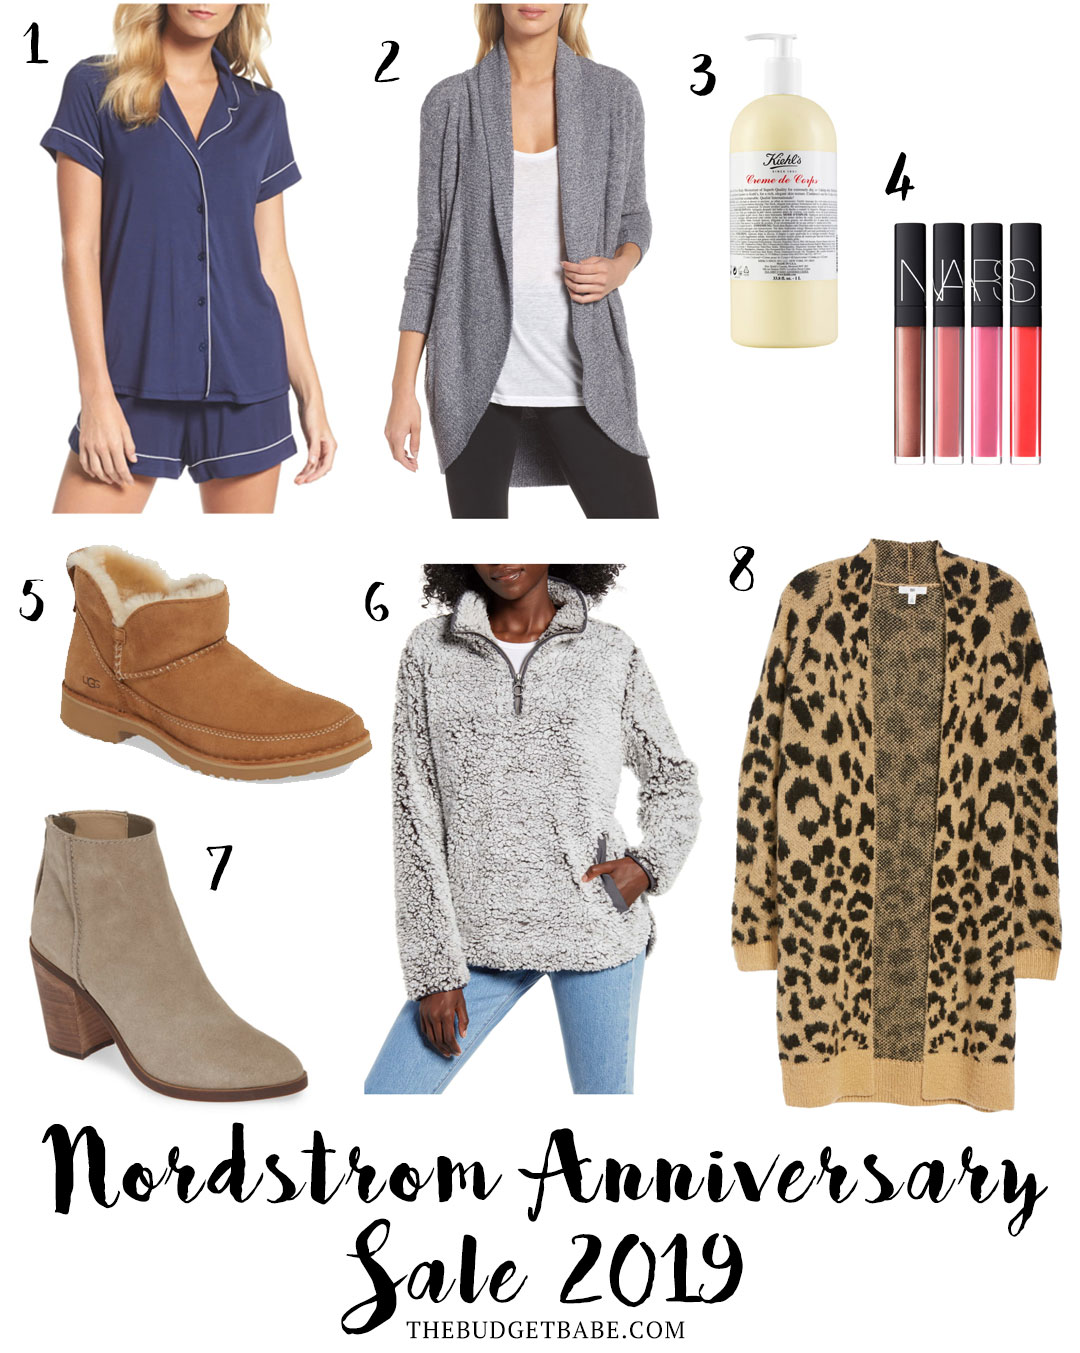 First look at the Nordstrom Anniversary Sale 2019!